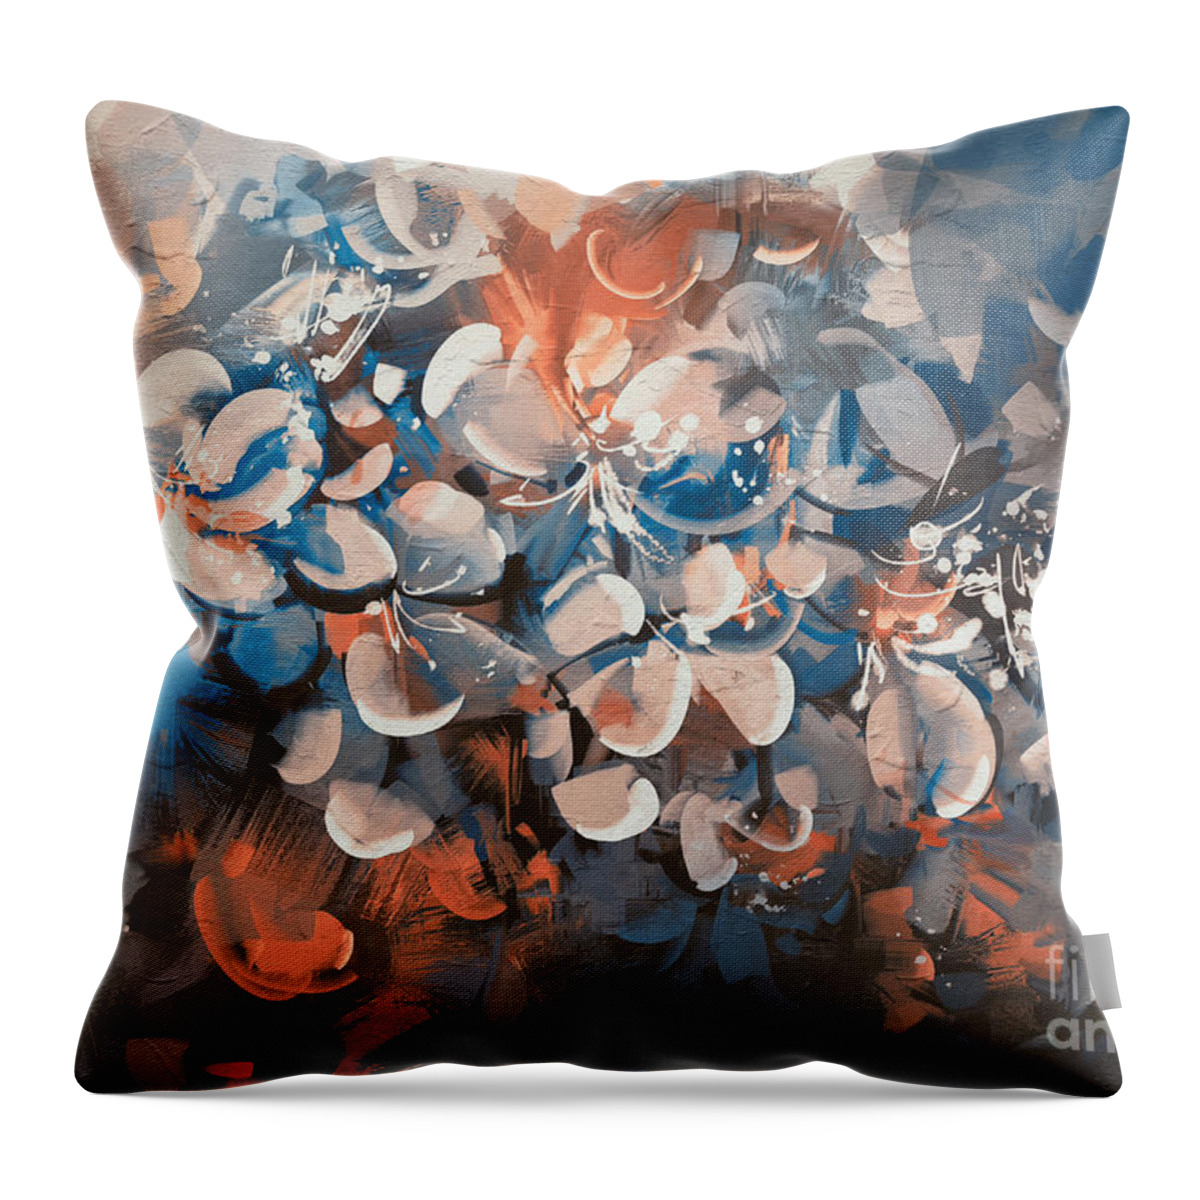 Abstract Throw Pillow featuring the painting Vintage Petal by Tithi Luadthong